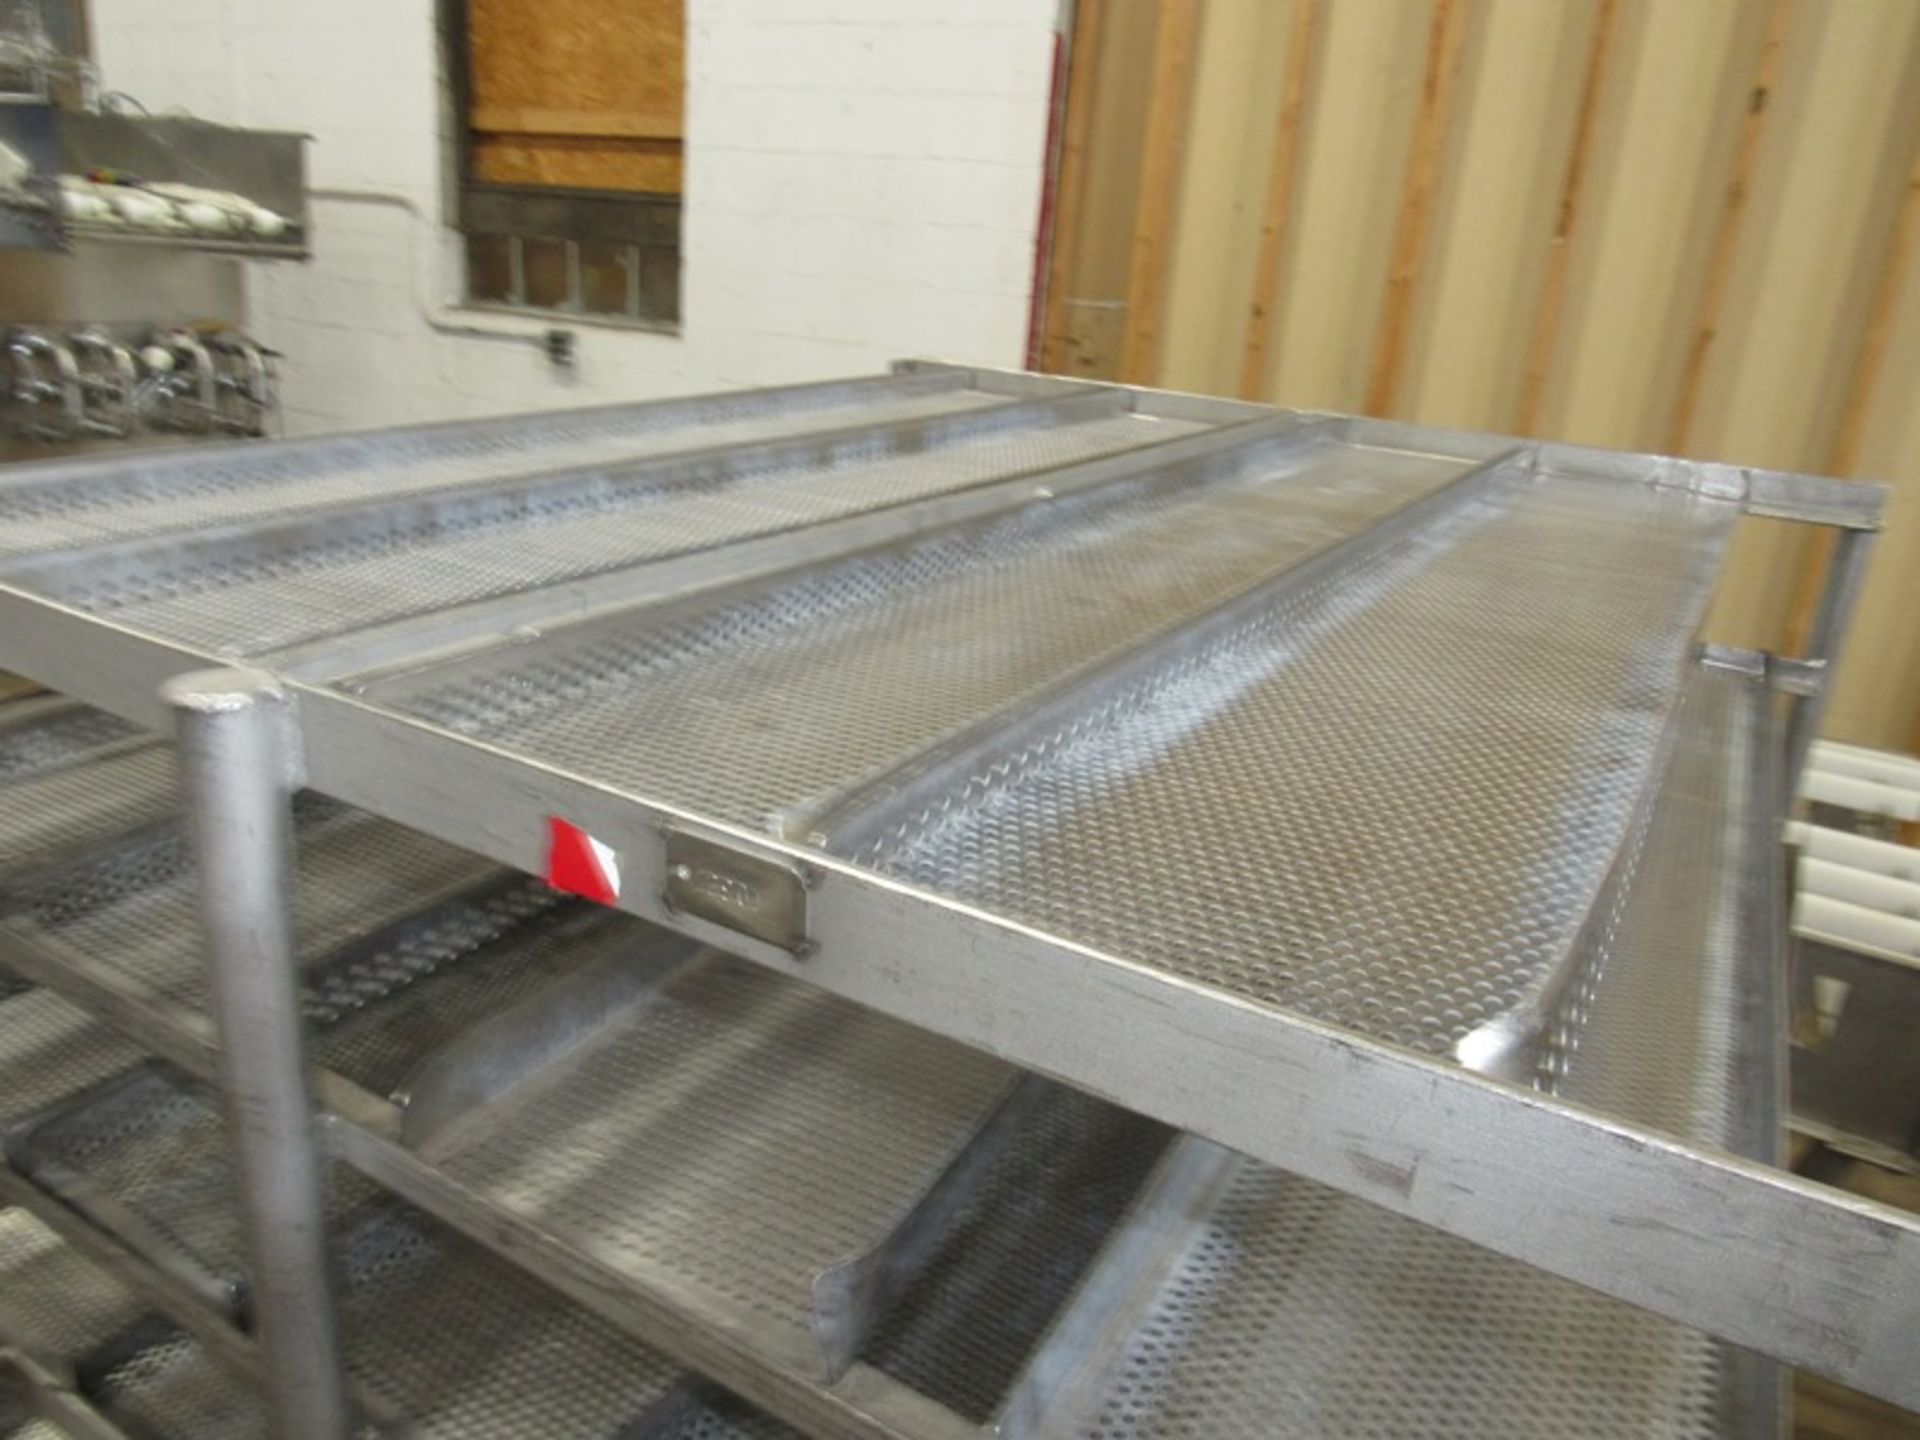 Portable Stainless Steel Carts, 43" W X 52" L X 5' T, 34 removable perforated trays, 8" W X 48" L, - Image 2 of 5